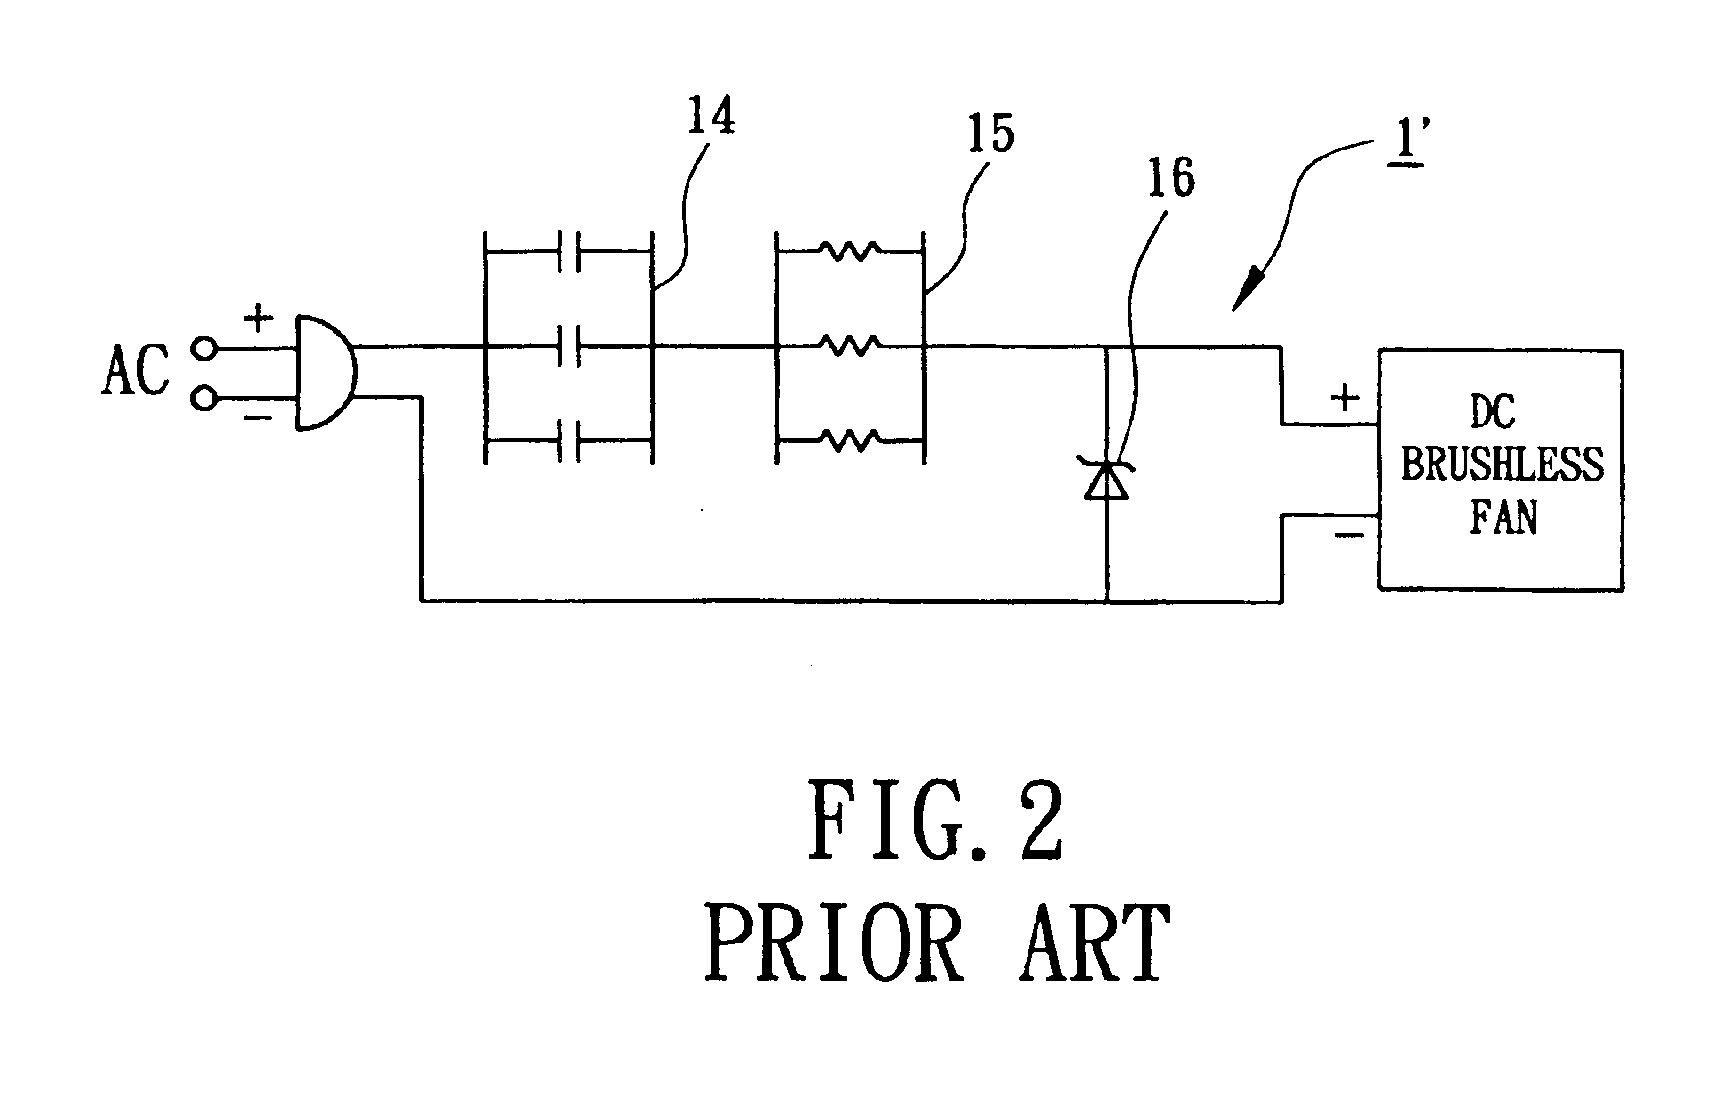 Brushless DC motor having an AC power control device